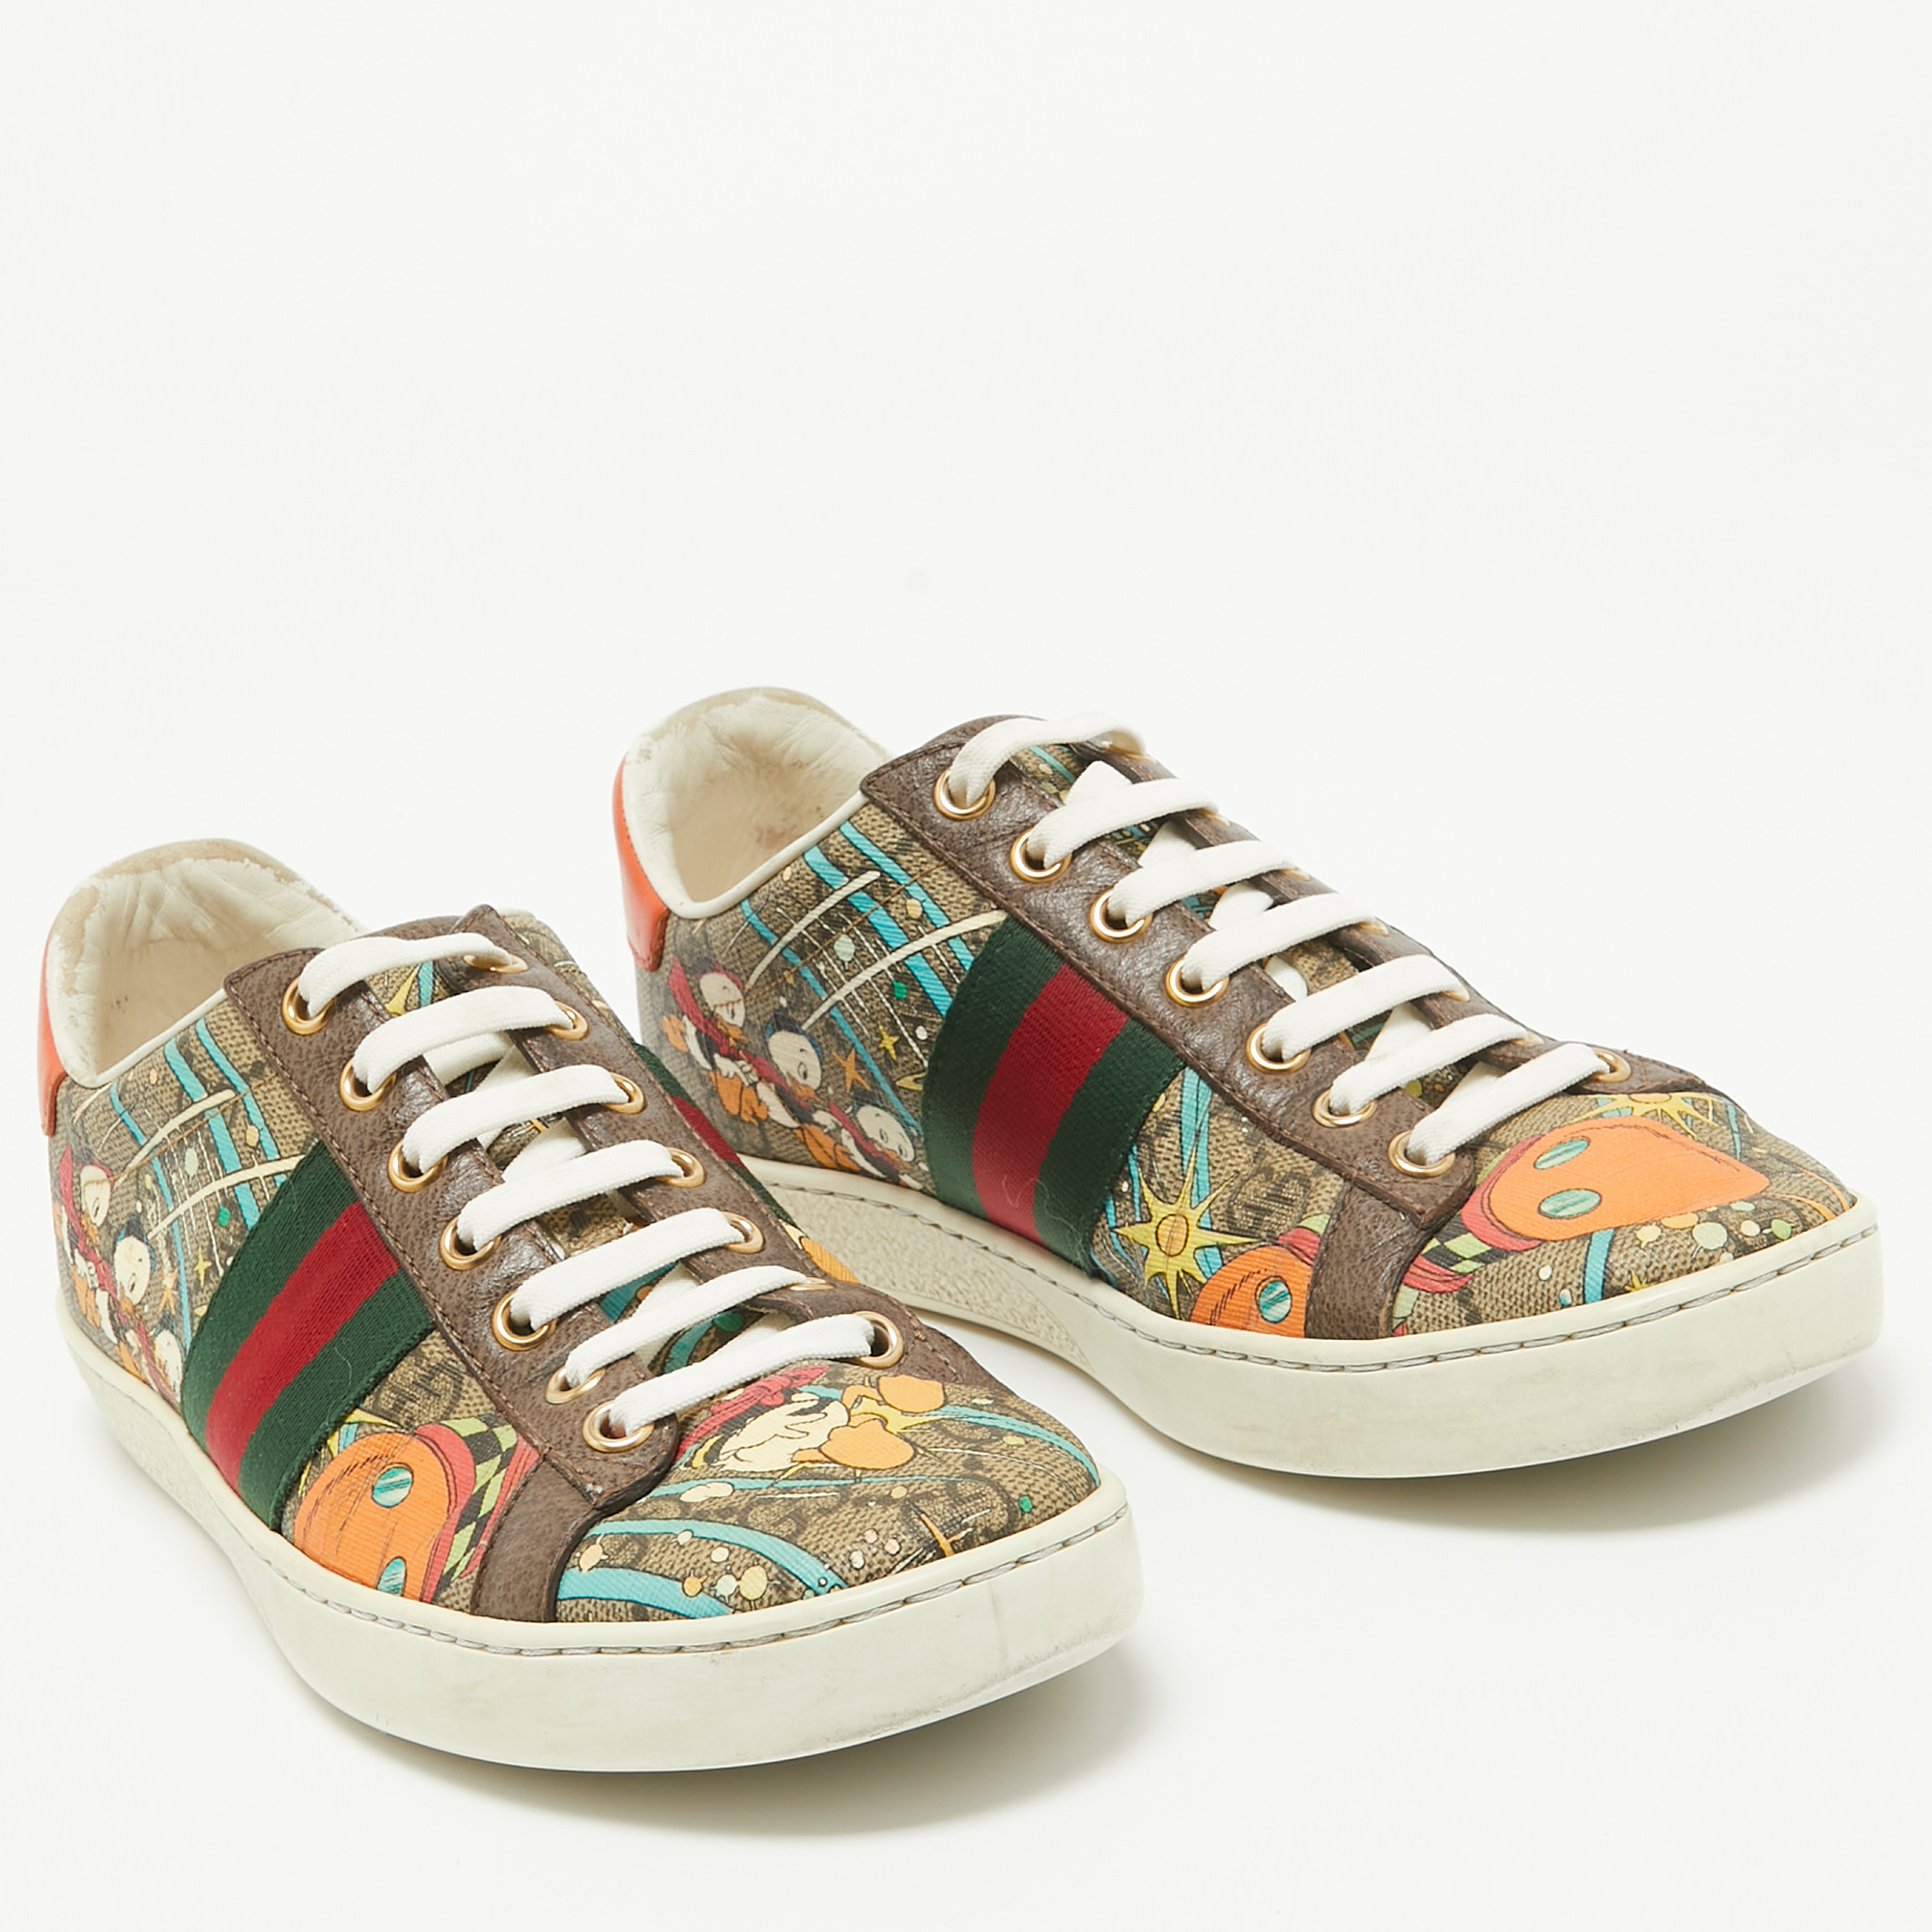 Gucci Multicolor Leather And Canvas Graphic Print Ace Sneakers Size 37